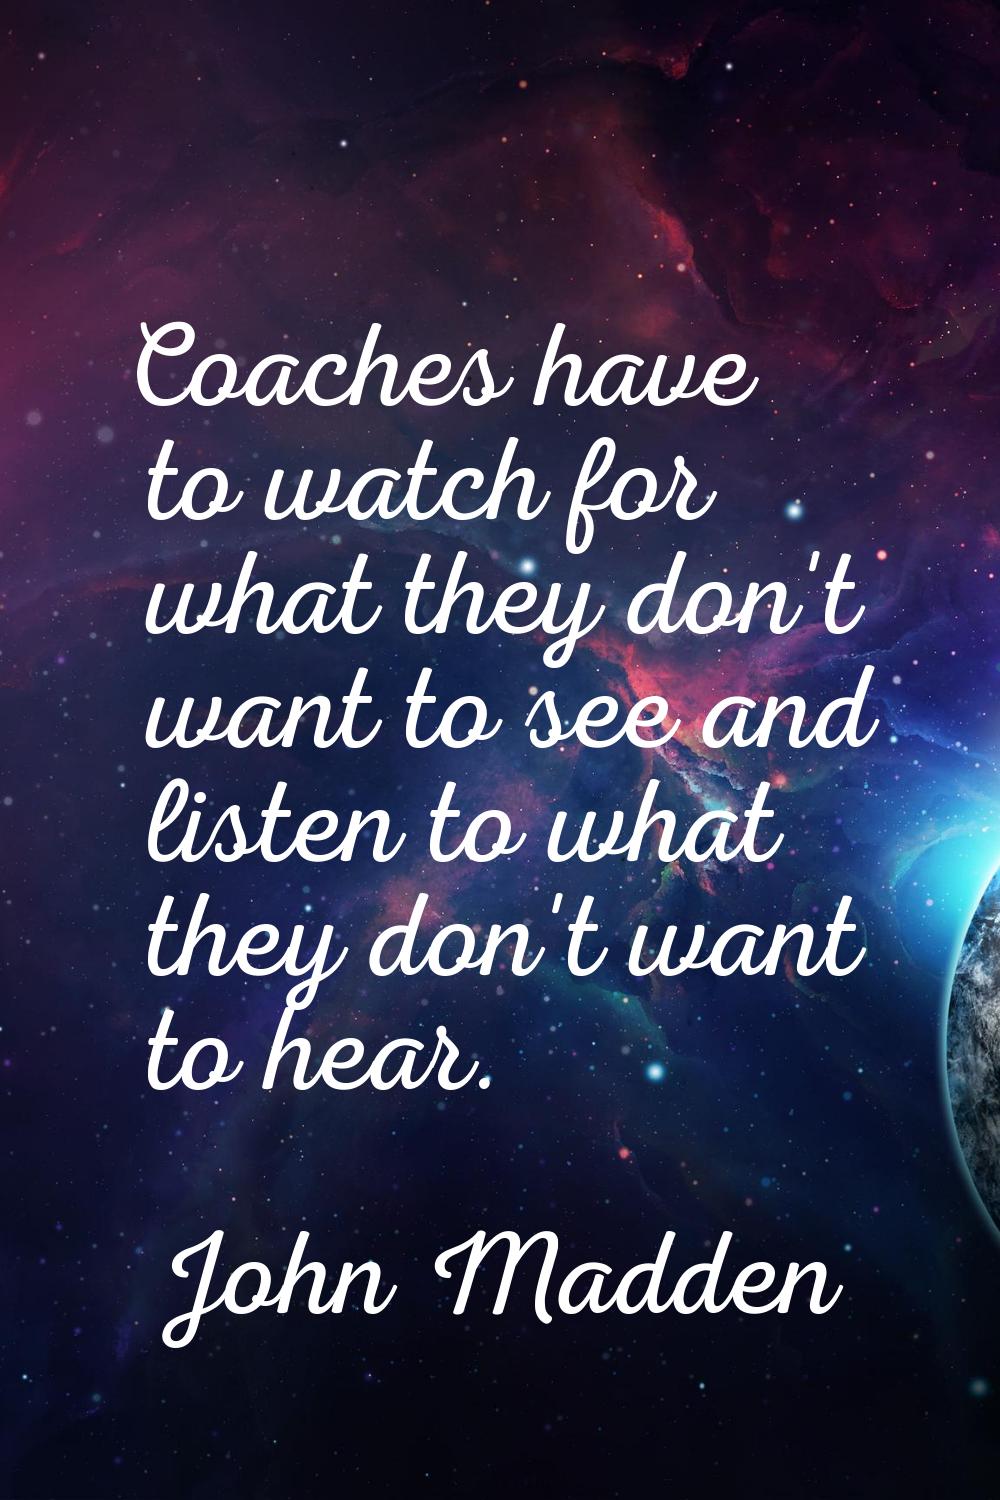 Coaches have to watch for what they don't want to see and listen to what they don't want to hear.